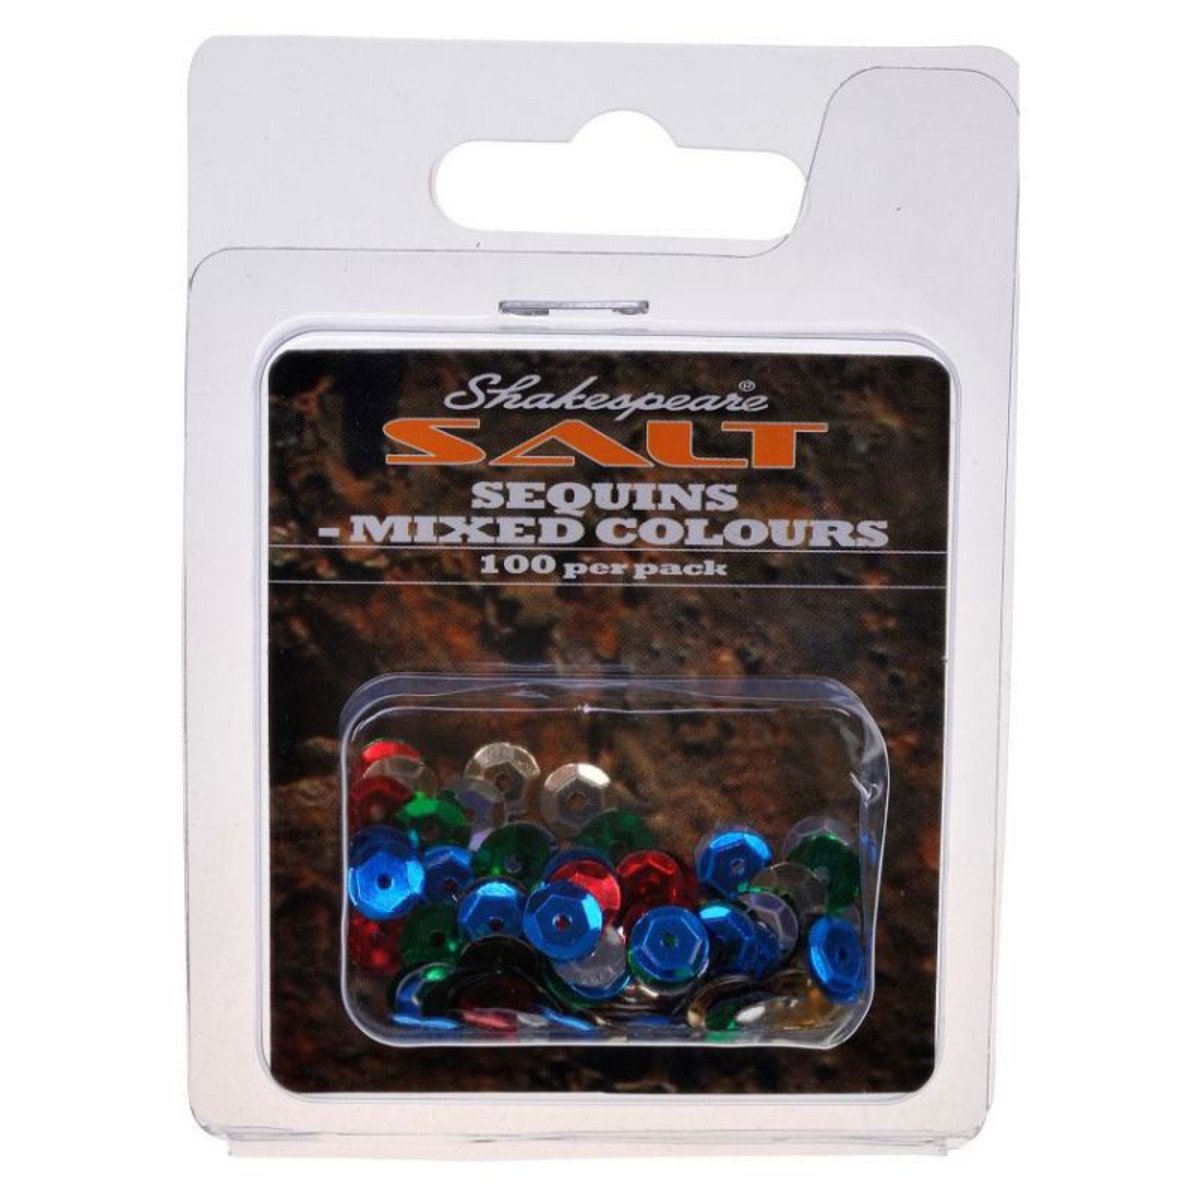 Shakespeare Sequins 100 Mixed Colours - 8 g